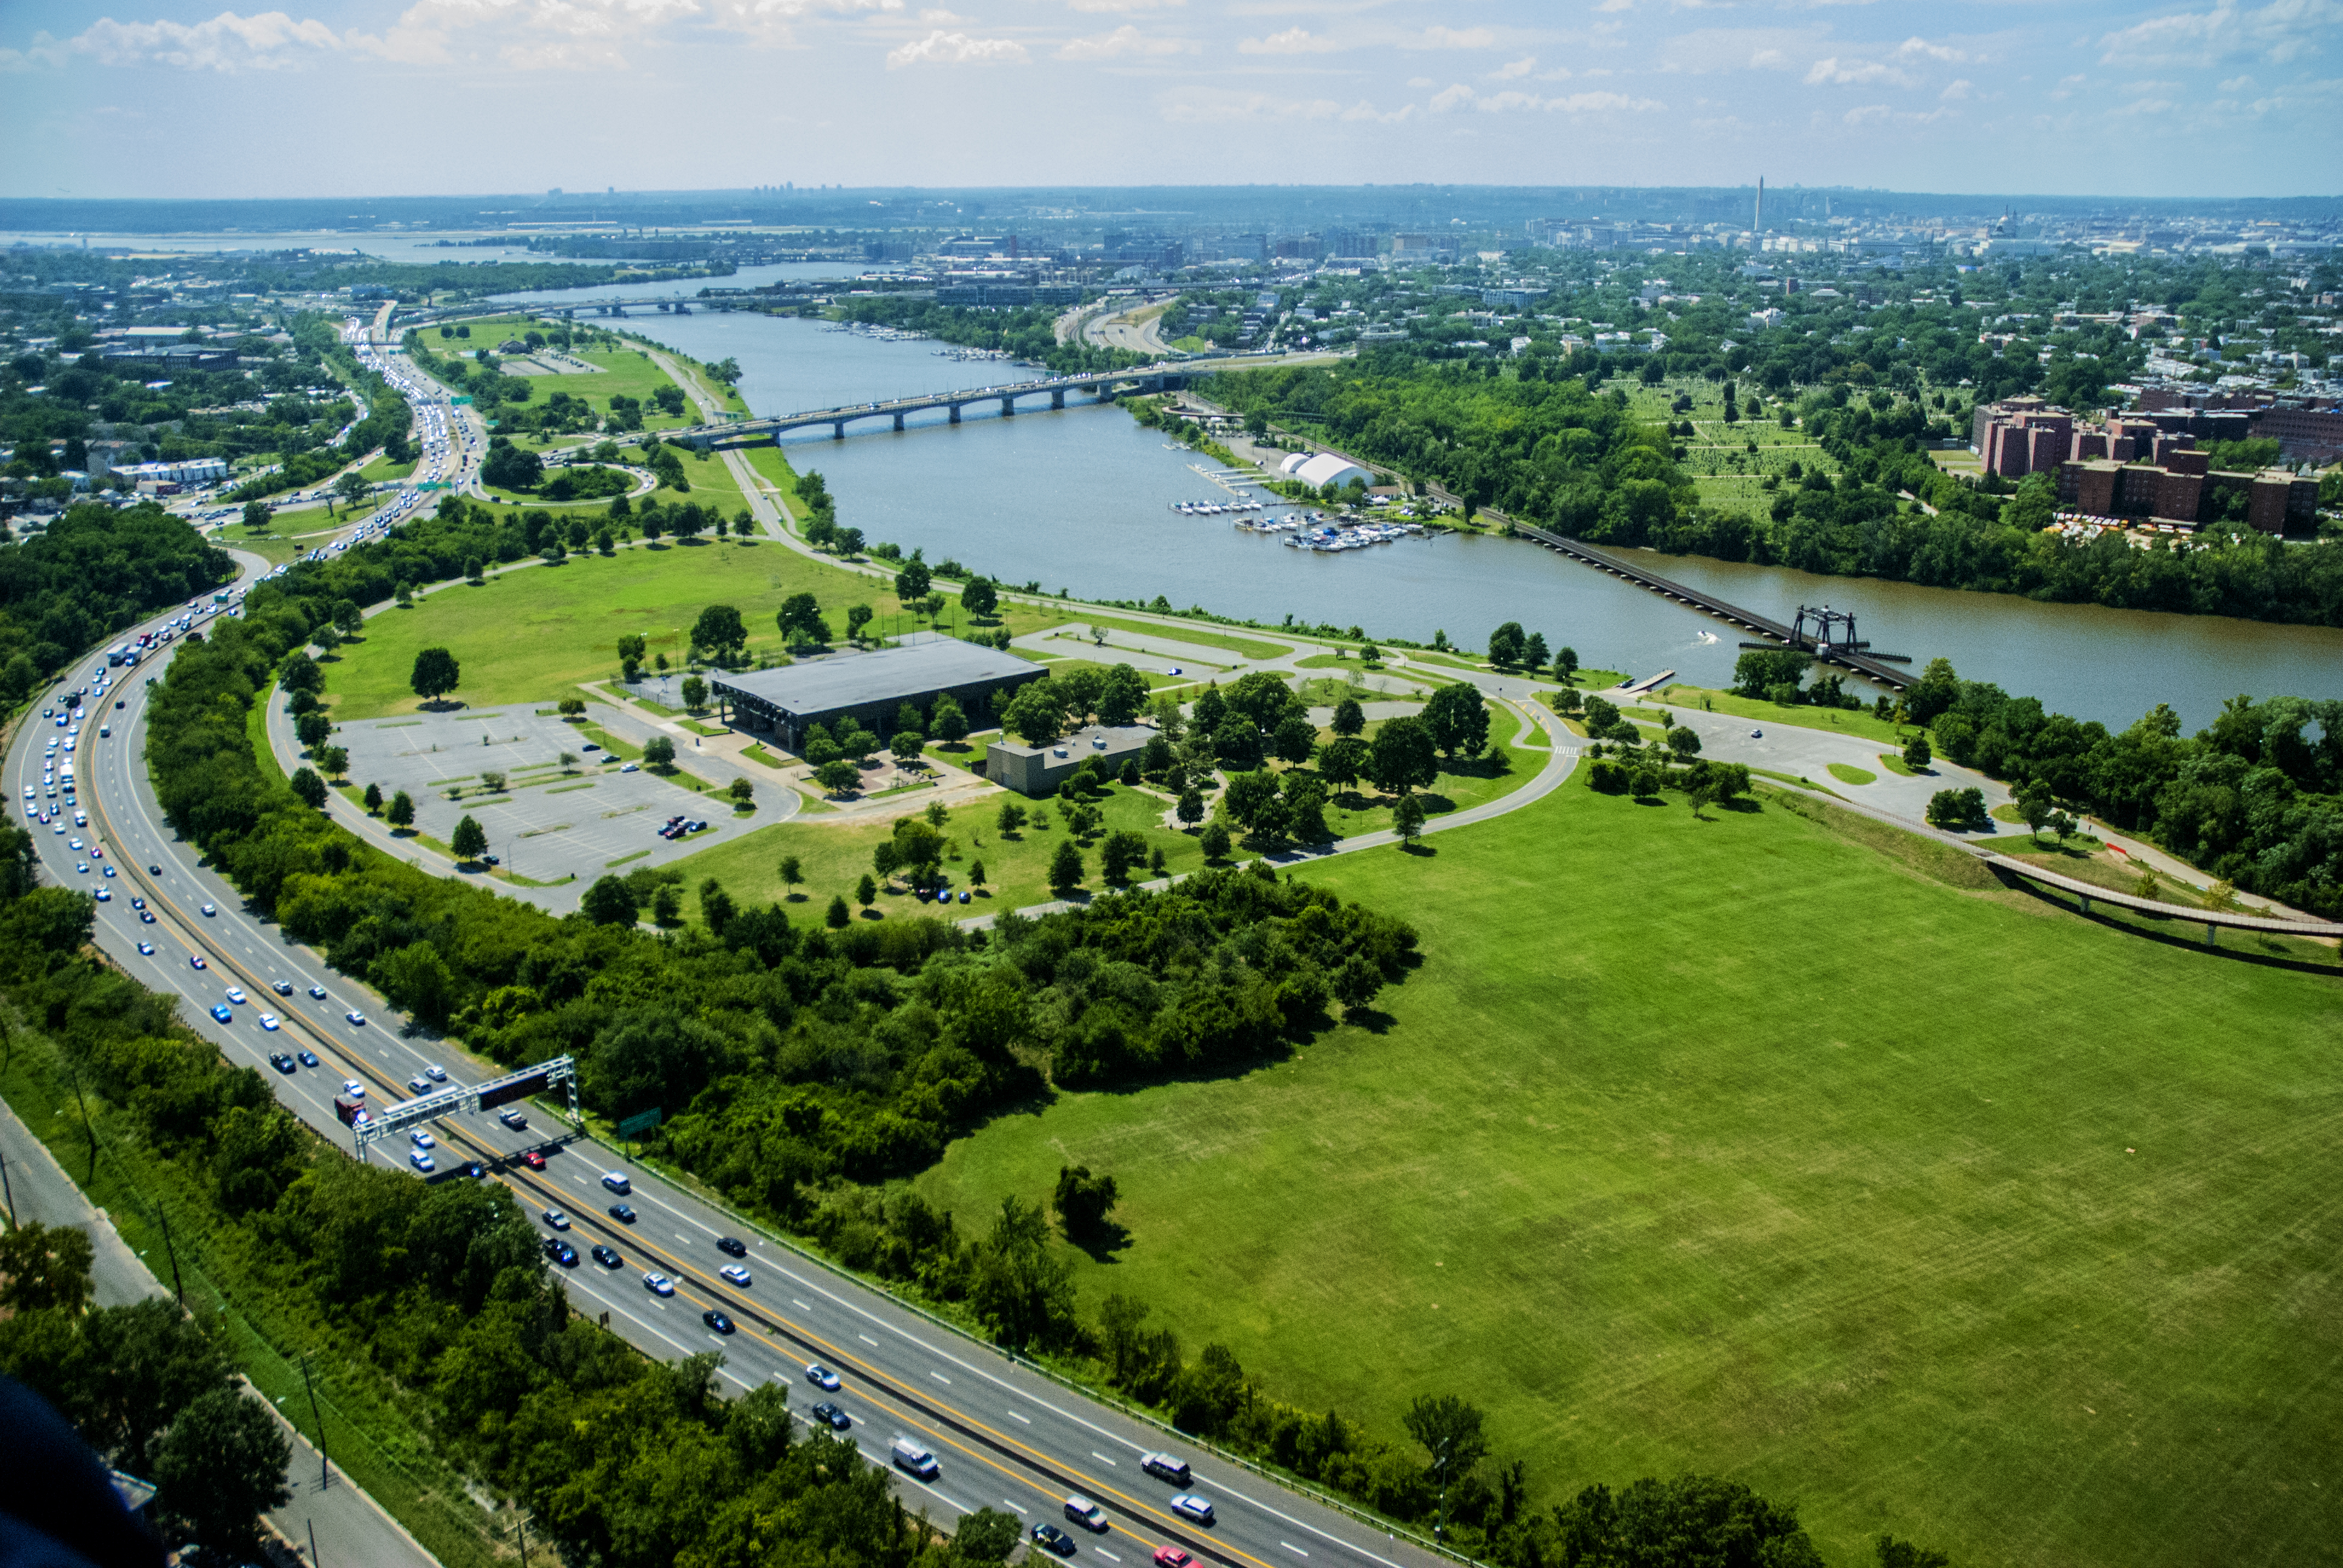 Aerial view of Anacostia River and Park